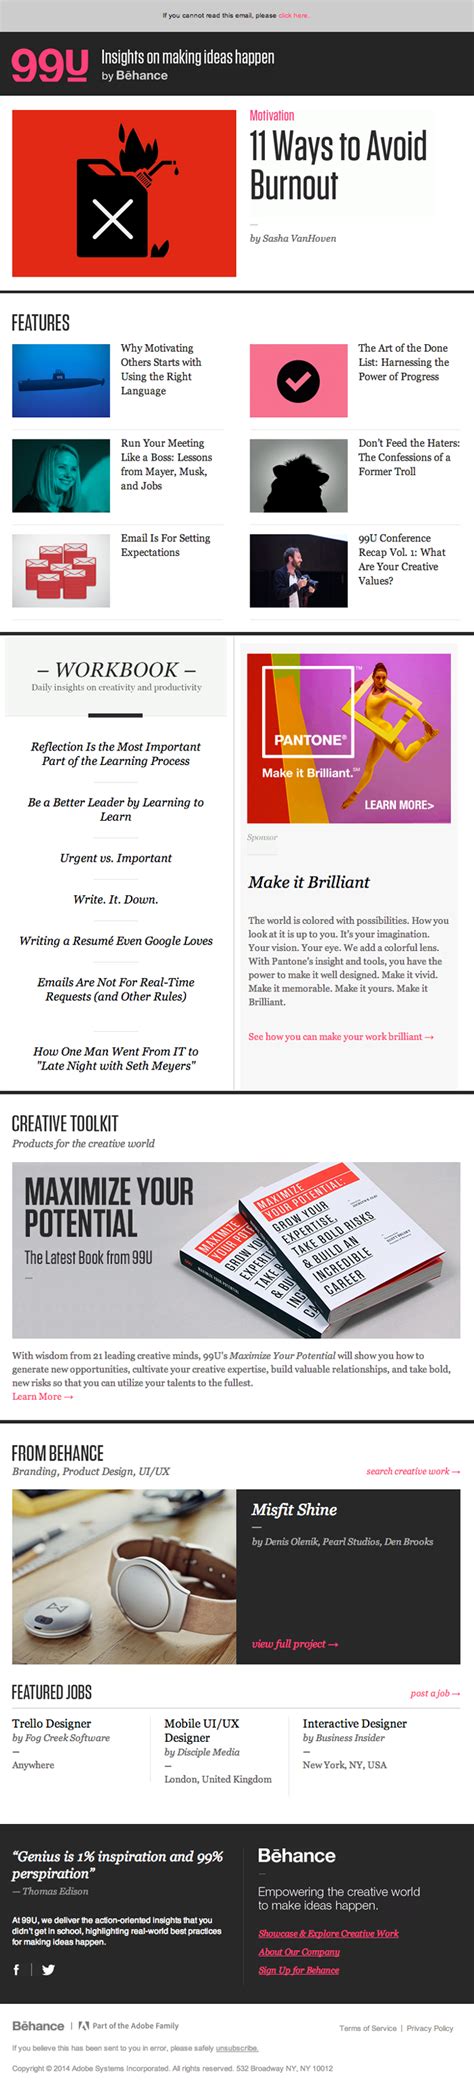 Email Newsletter Design From Behance From Behance Desktop Email View Really Good Emails